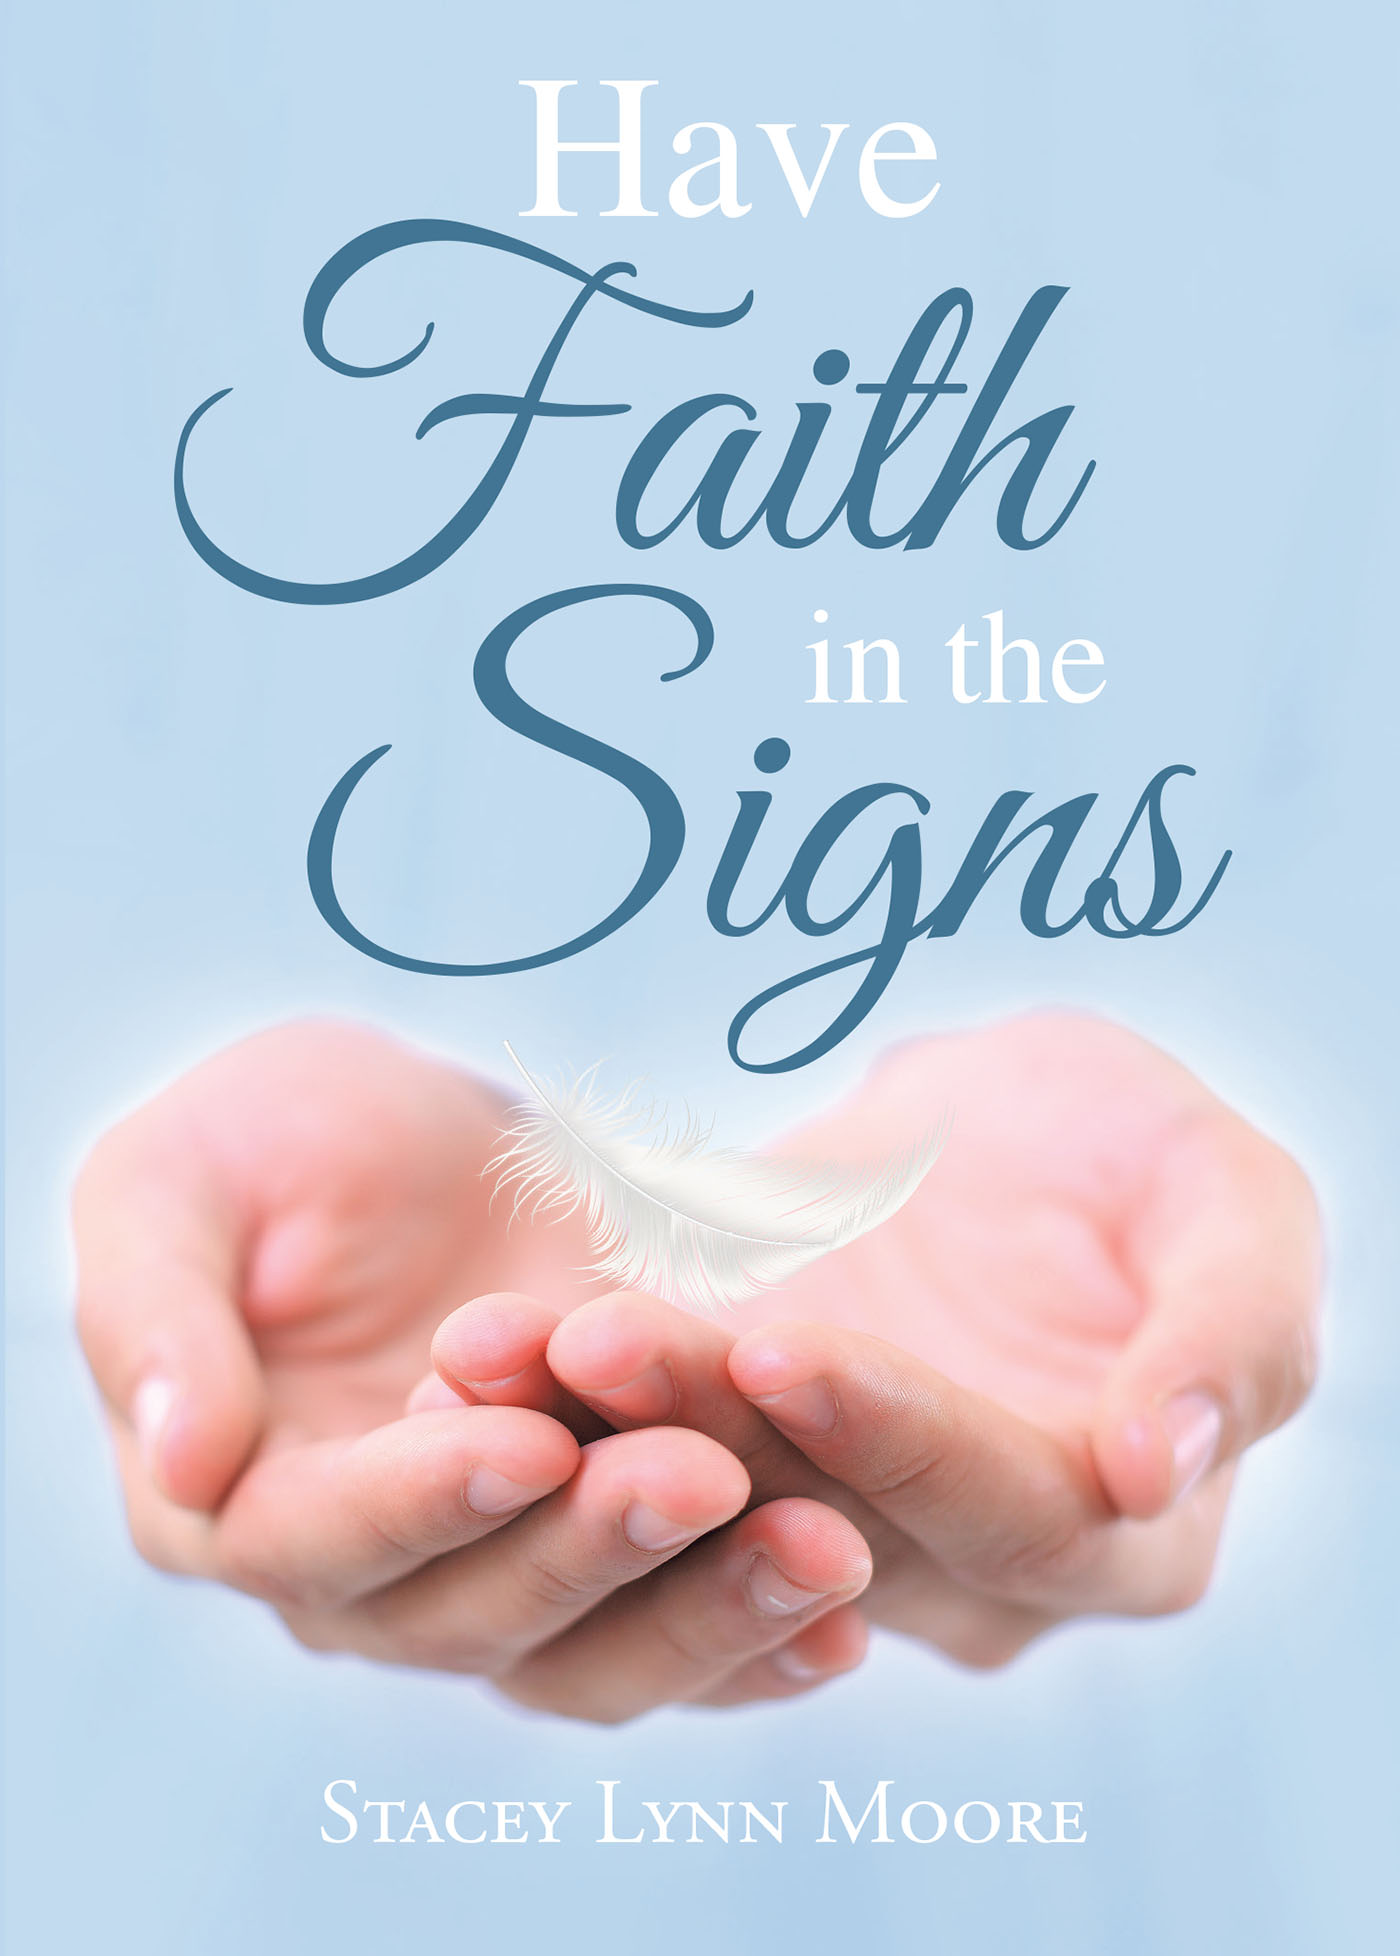 Stacey Lynn Moore’s Newly Released "Have Faith in the Signs" is an Inspiring Collection of Short Stories That Explore the Divine in One’s Daily Life